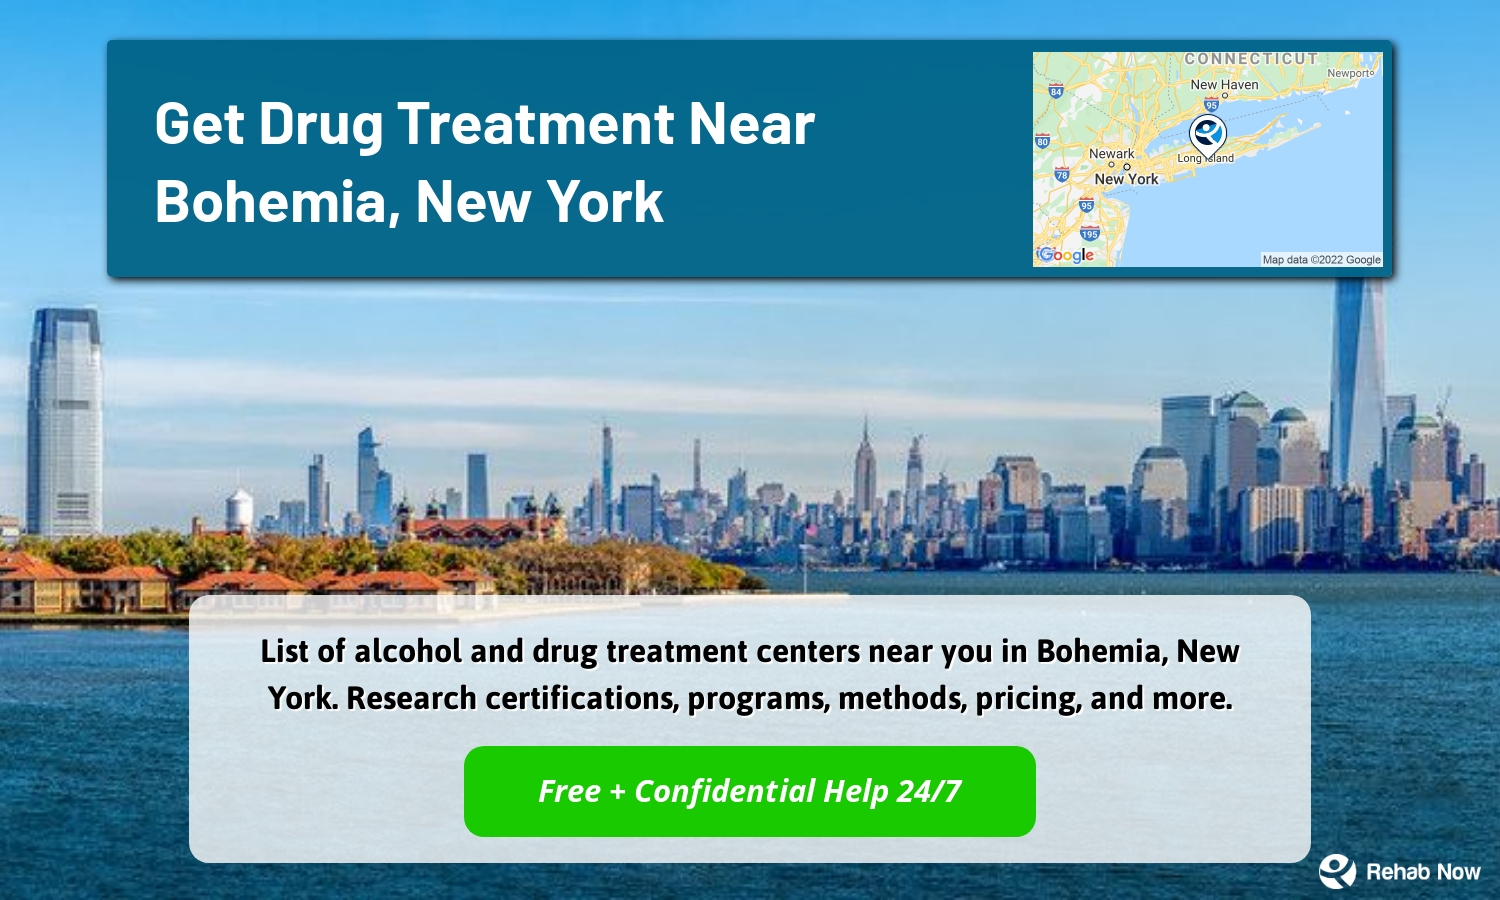 List of alcohol and drug treatment centers near you in Bohemia, New York. Research certifications, programs, methods, pricing, and more.